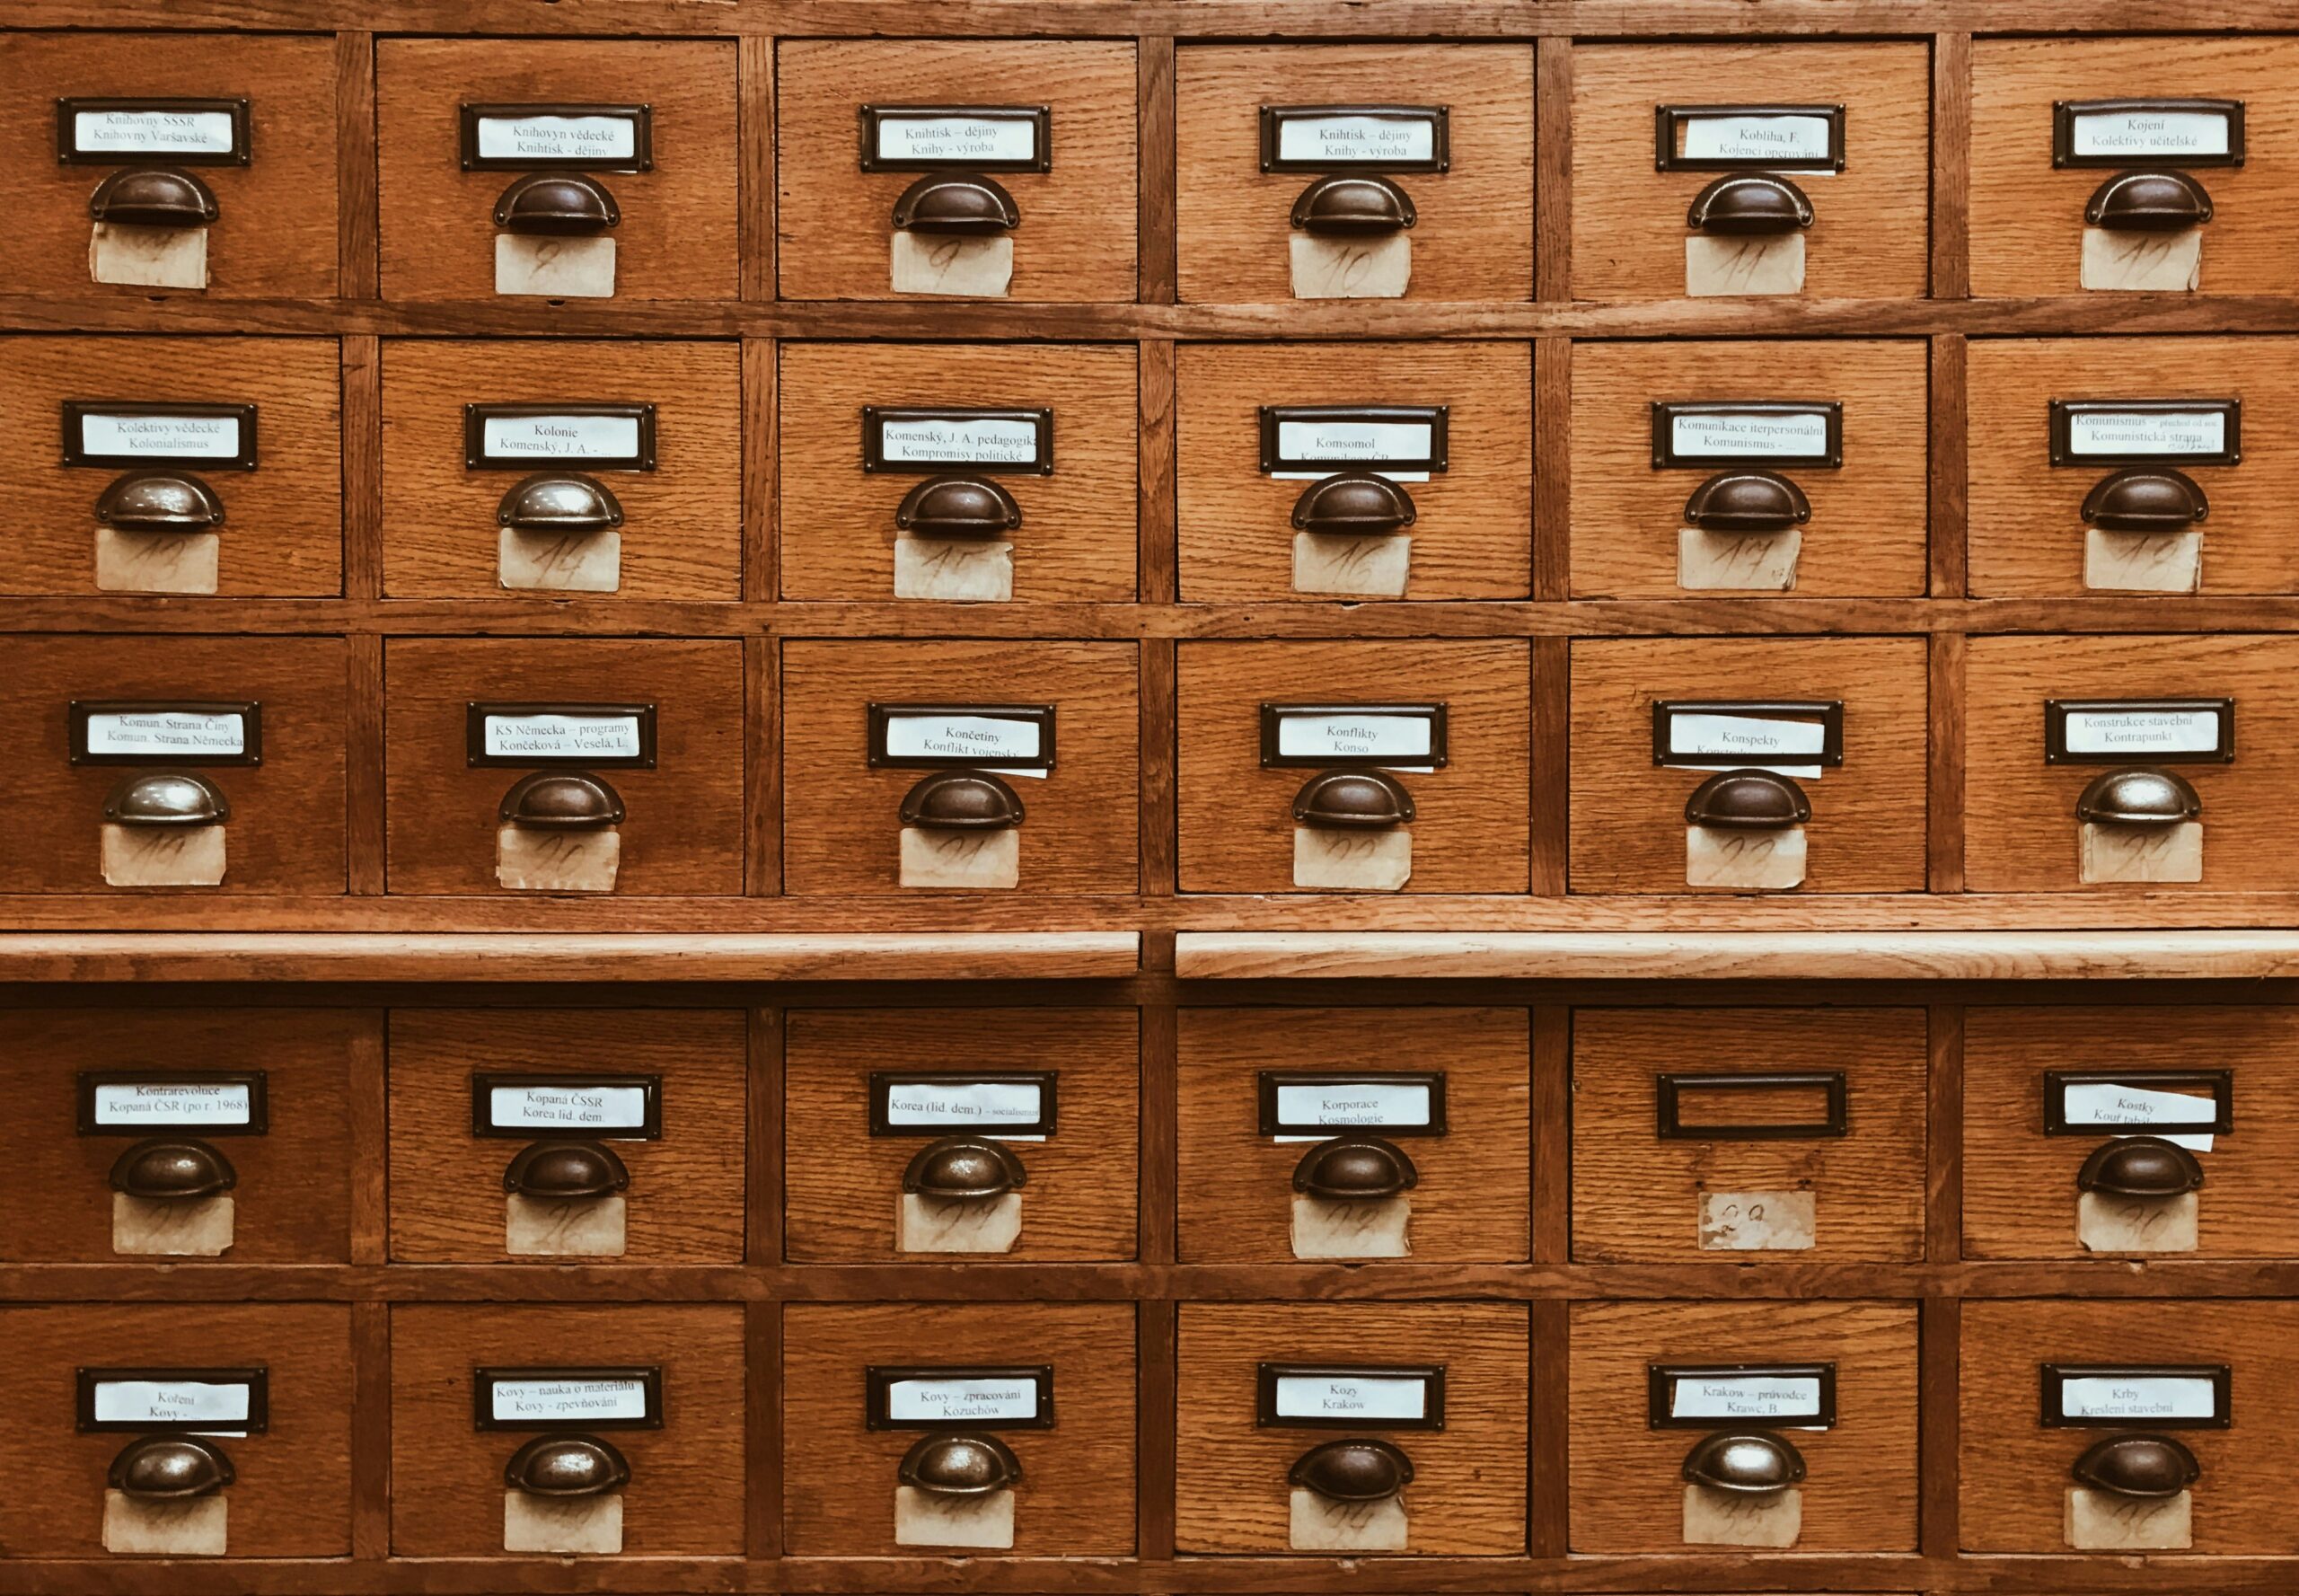 photograph of a wooden library database catalogue